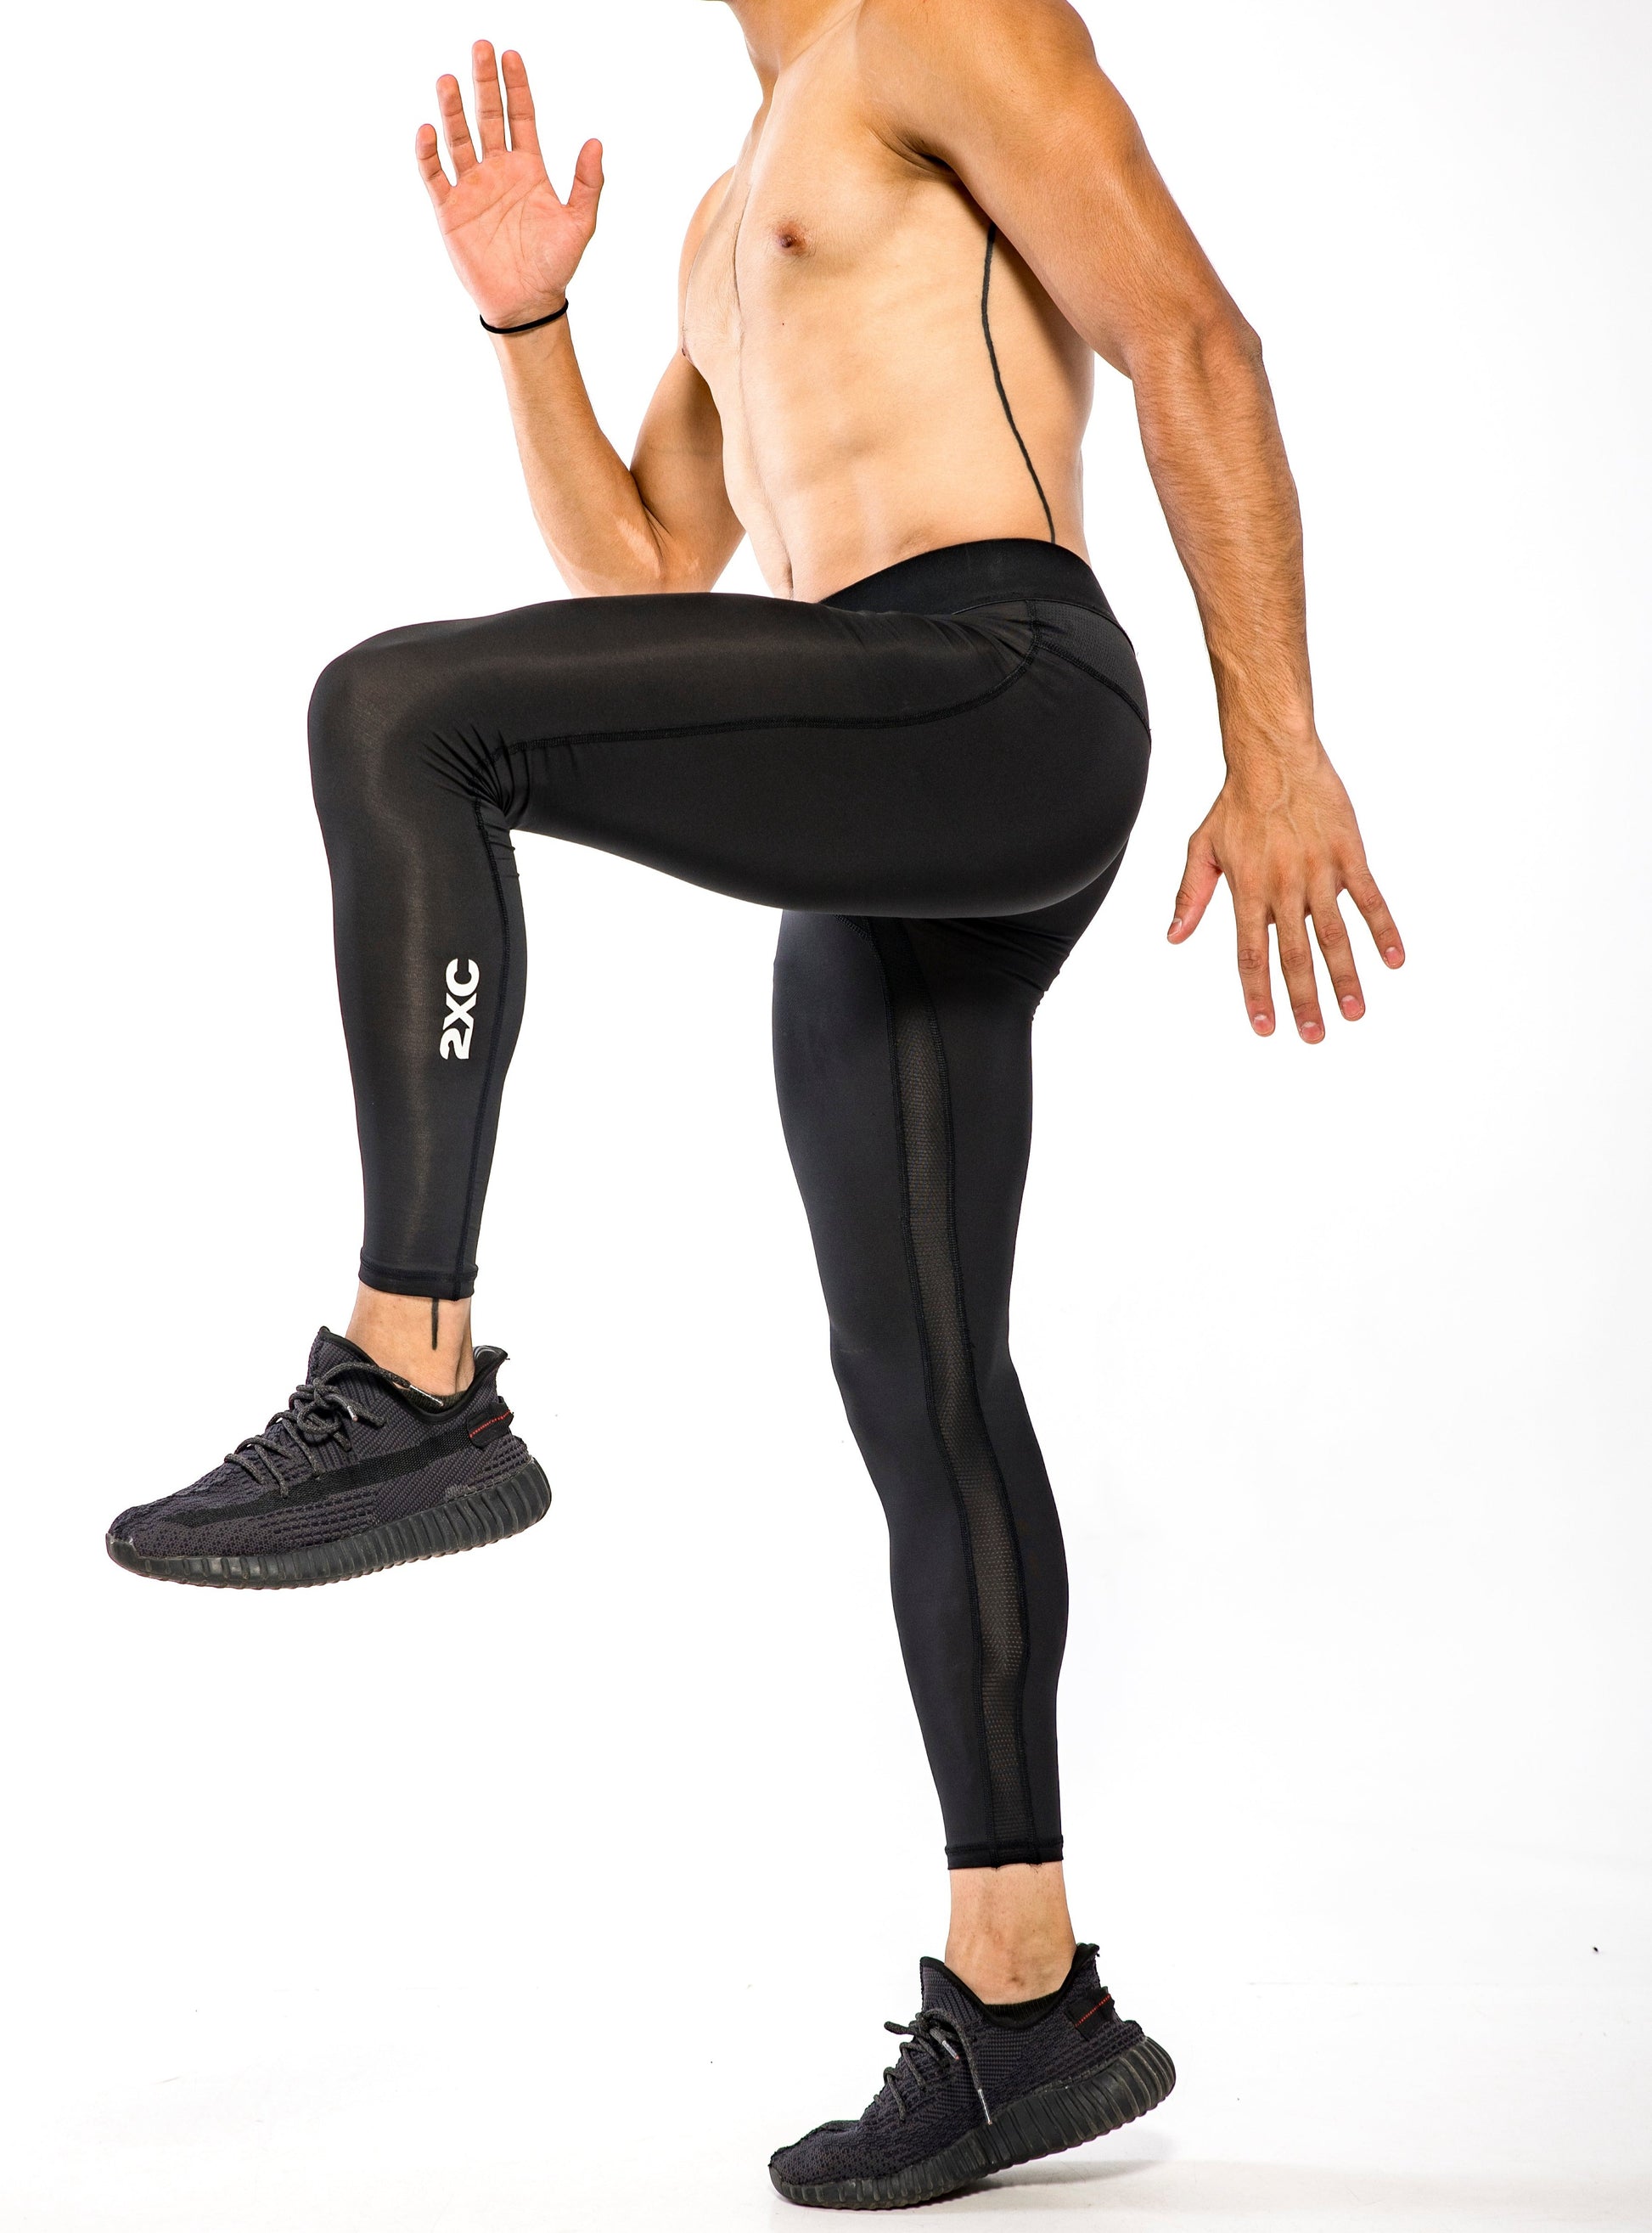 Skins Dnamic Compression Tights - Best Price in Singapore - Jan